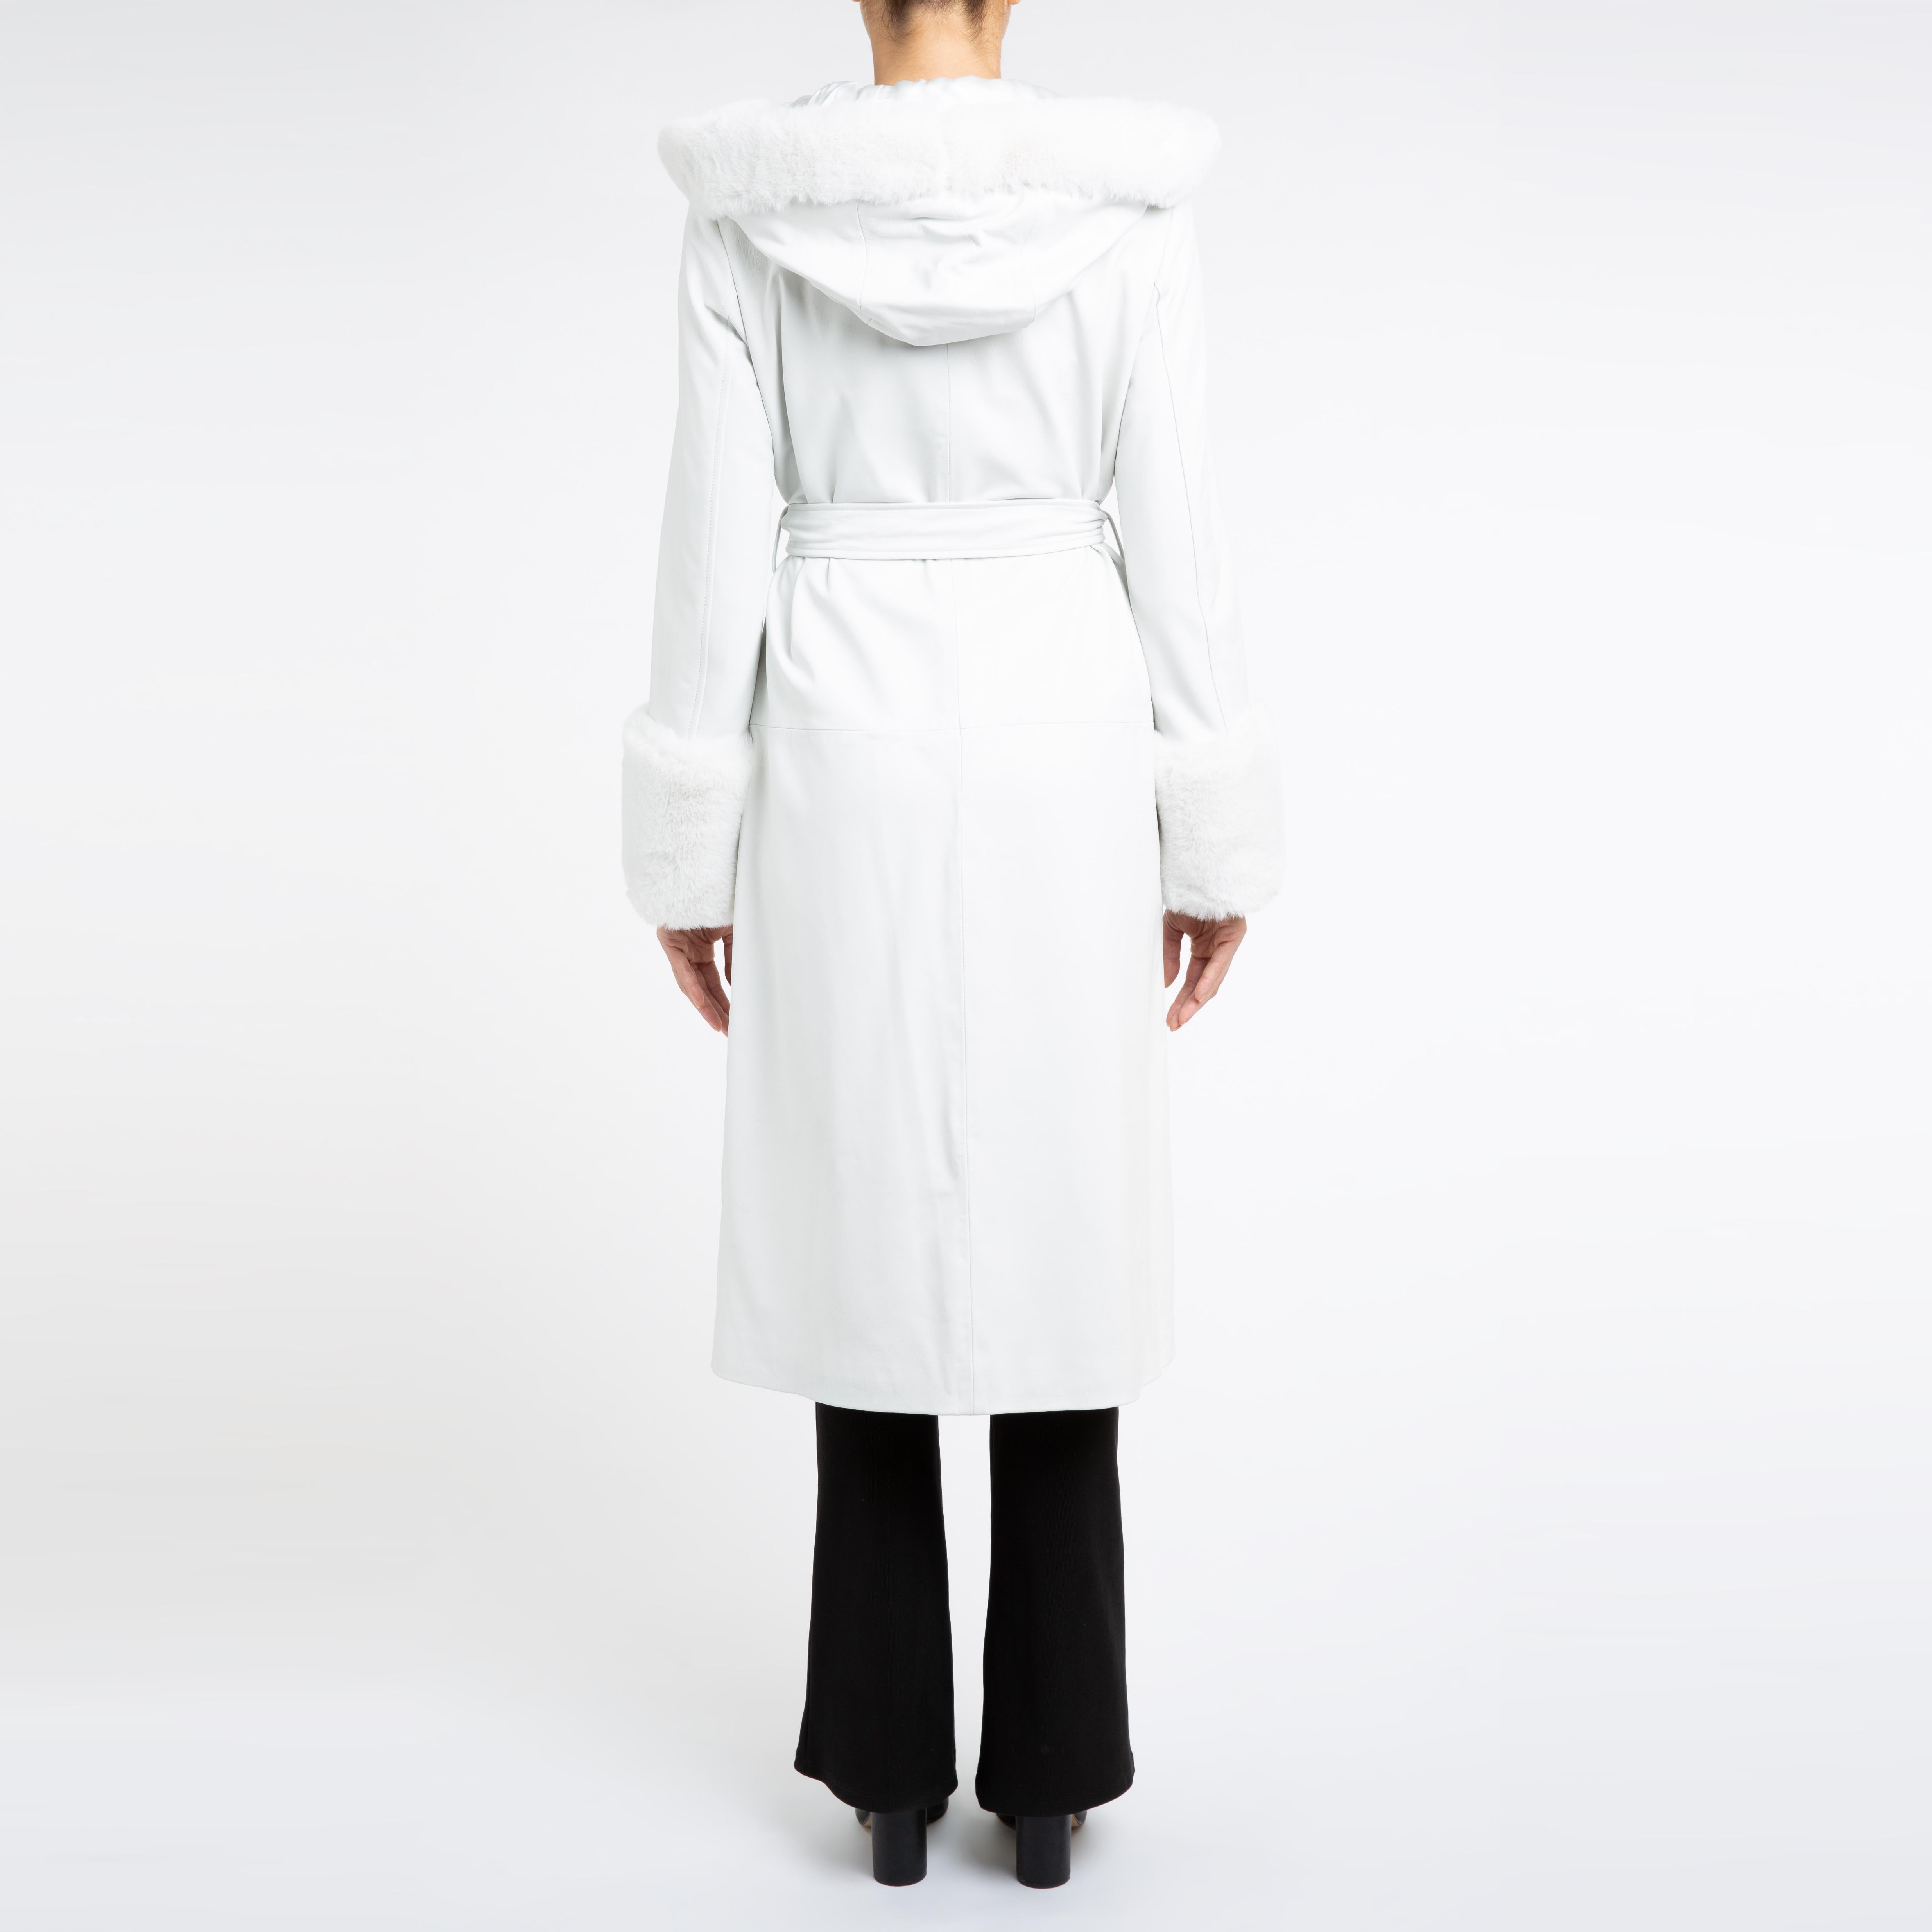 Verheyen Aurora Hooded Leather Trench Coat in White with Faux Fur - Size uk 10 For Sale 7